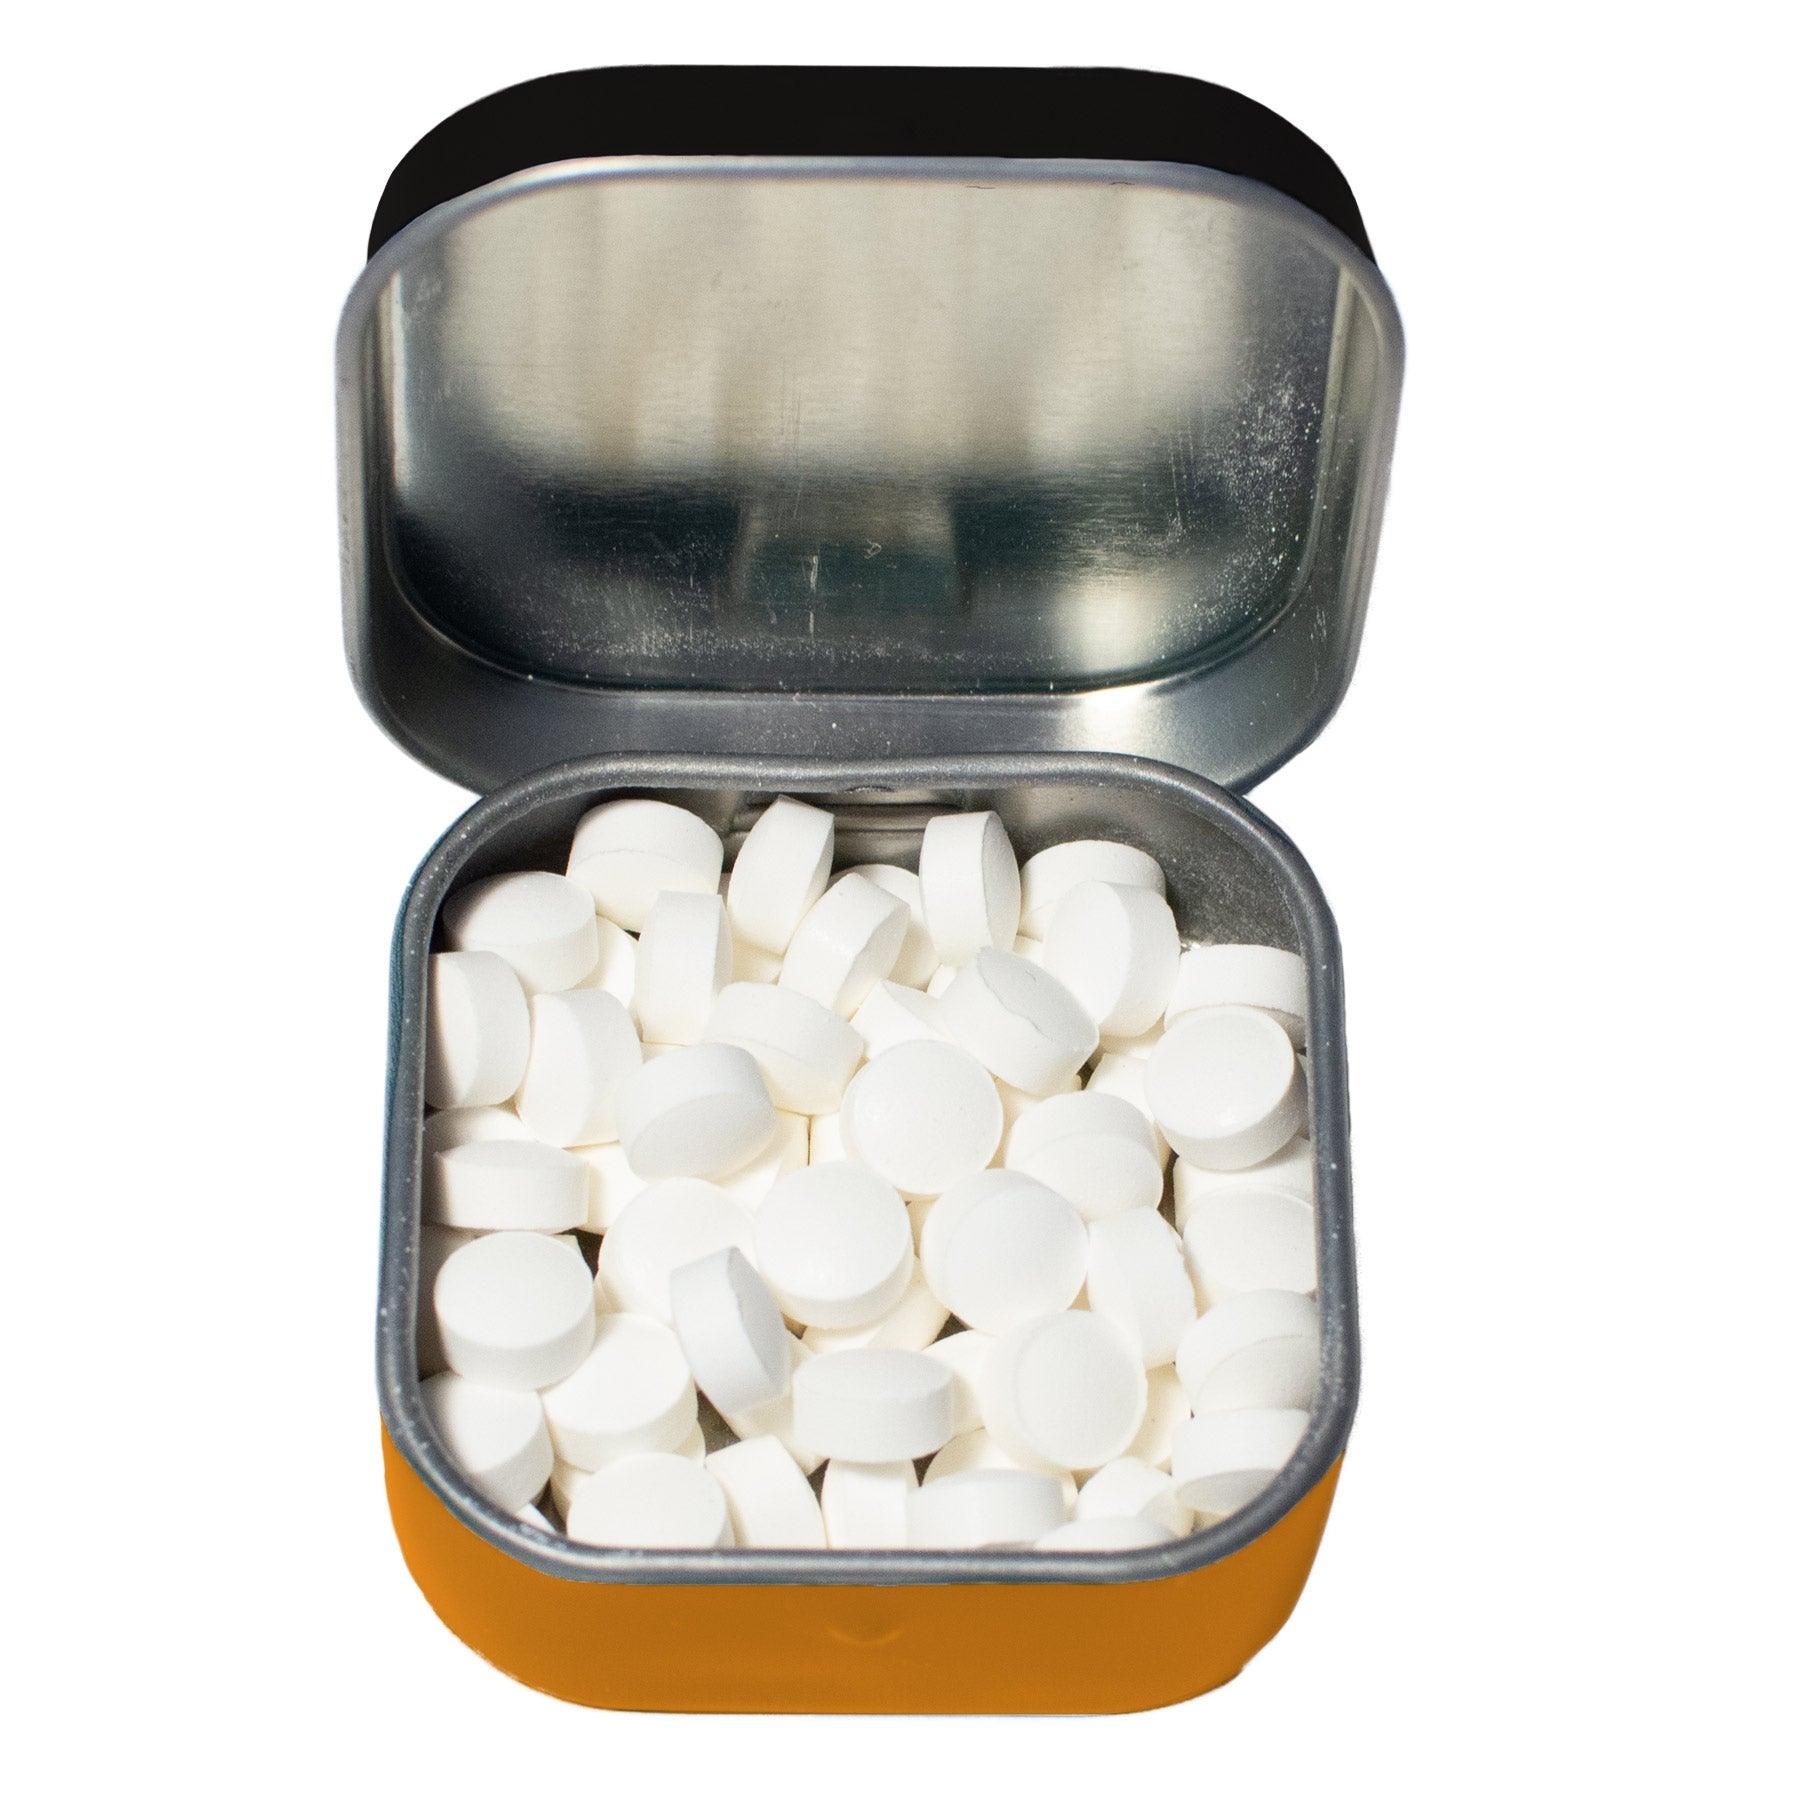 Product photo of After Therapy Mints, a novelty gift manufactured by The Unemployed Philosophers Guild.